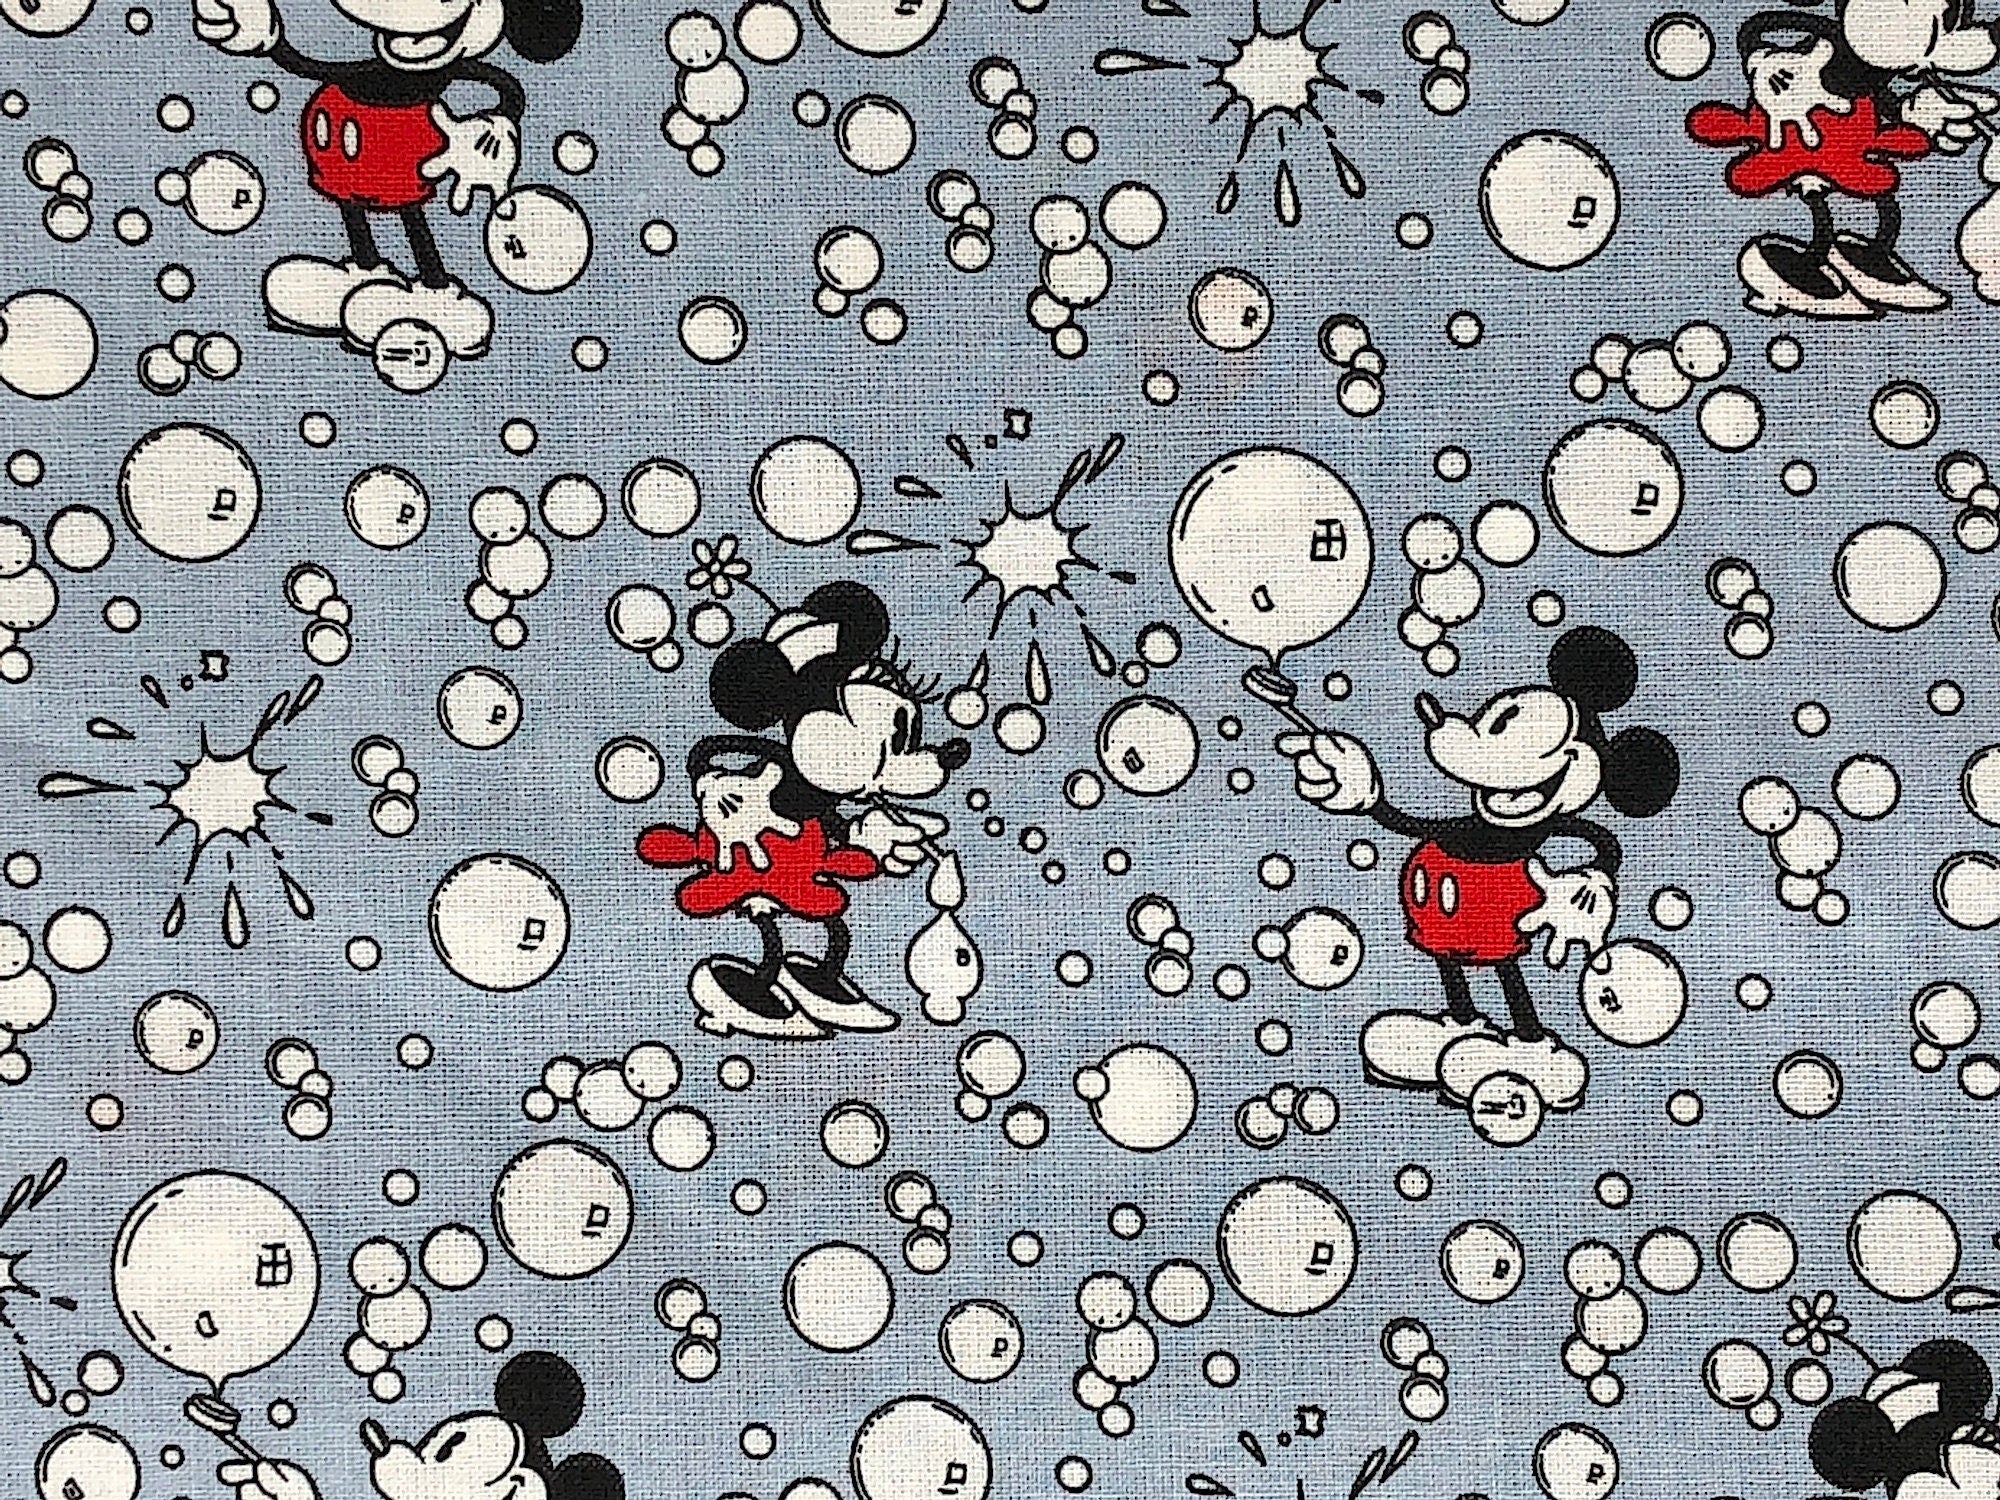 Close up of Mickey and Minnie Mouse blowing bubbles on a grey background.